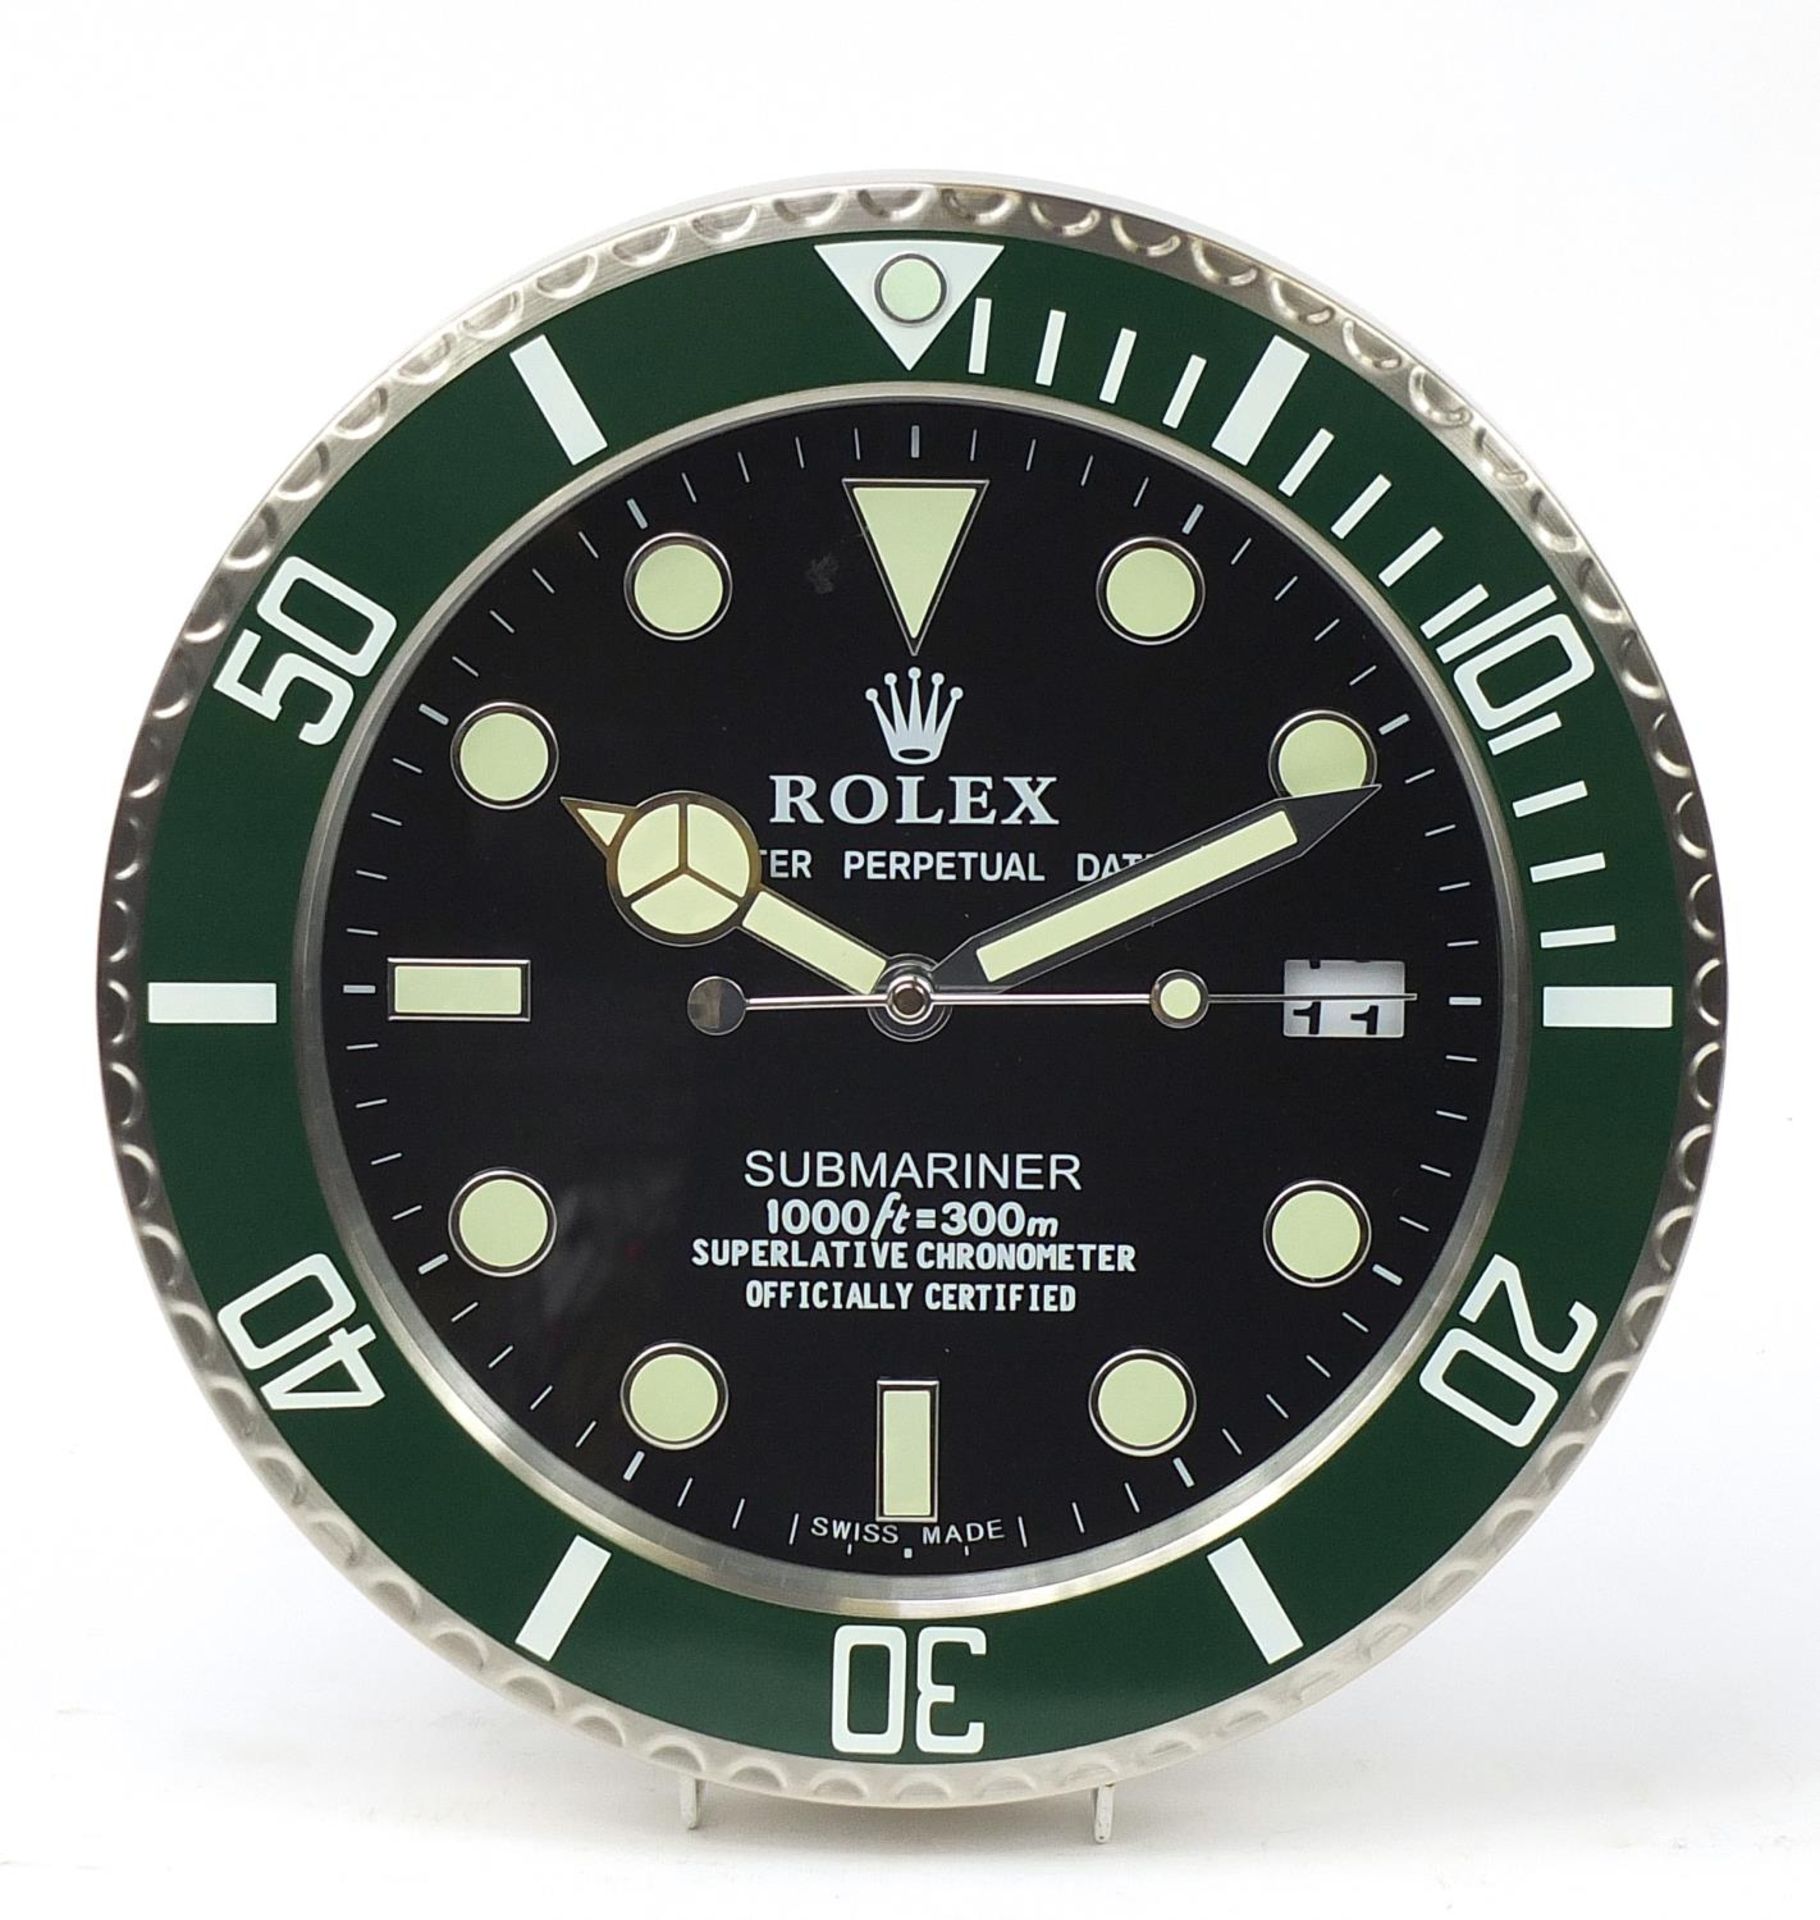 Rolex Submariner design dealers display wall clock, 34cm in diameter : For Further Condition Reports